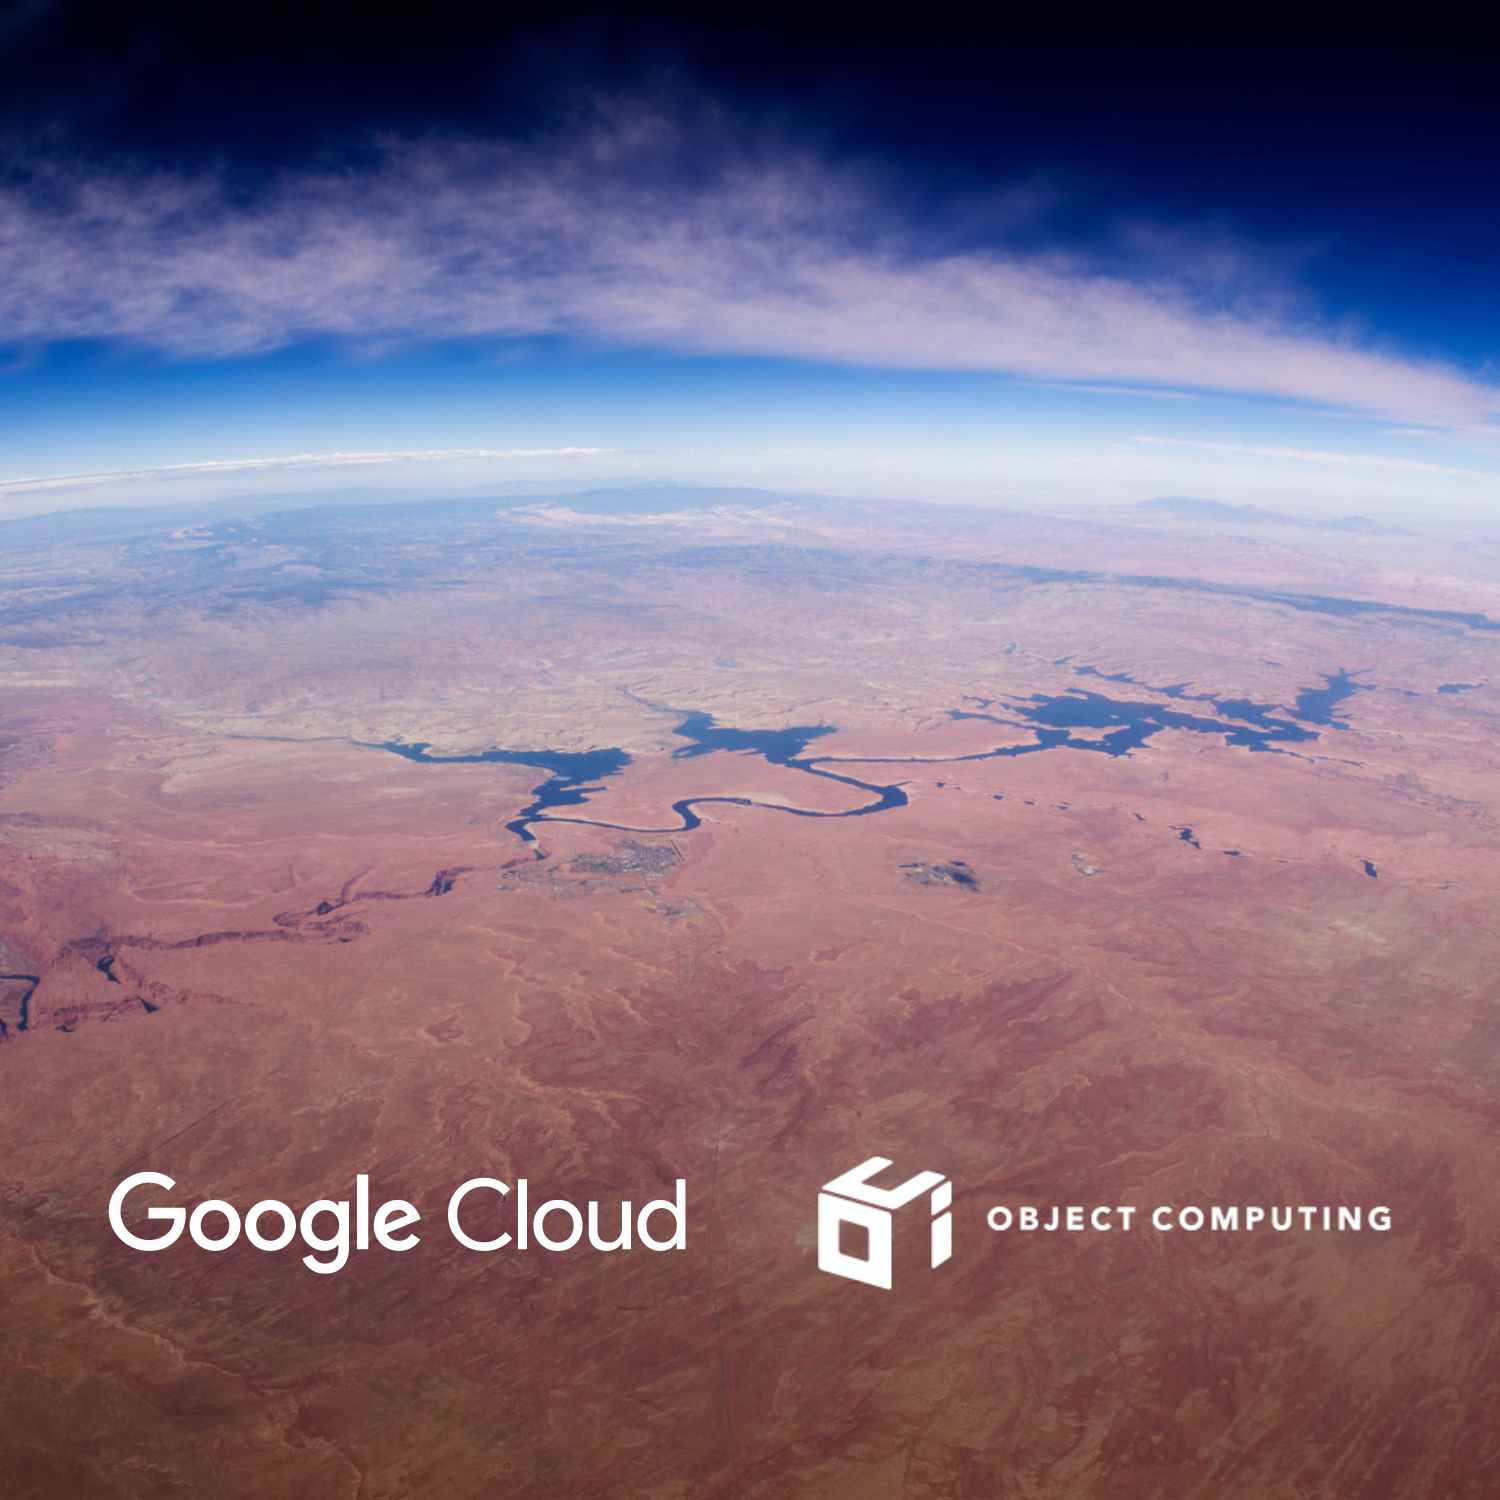 OBJECT COMPUTING IS 1 OF 10 COMPANIES WORLDWIDE WITH GOOGLE EARTH ENGINE EXPERTISE, A TESTAMENT TO OUR TECHNICAL SAVVY AND SUCCESS WITH THE PRODUCT.